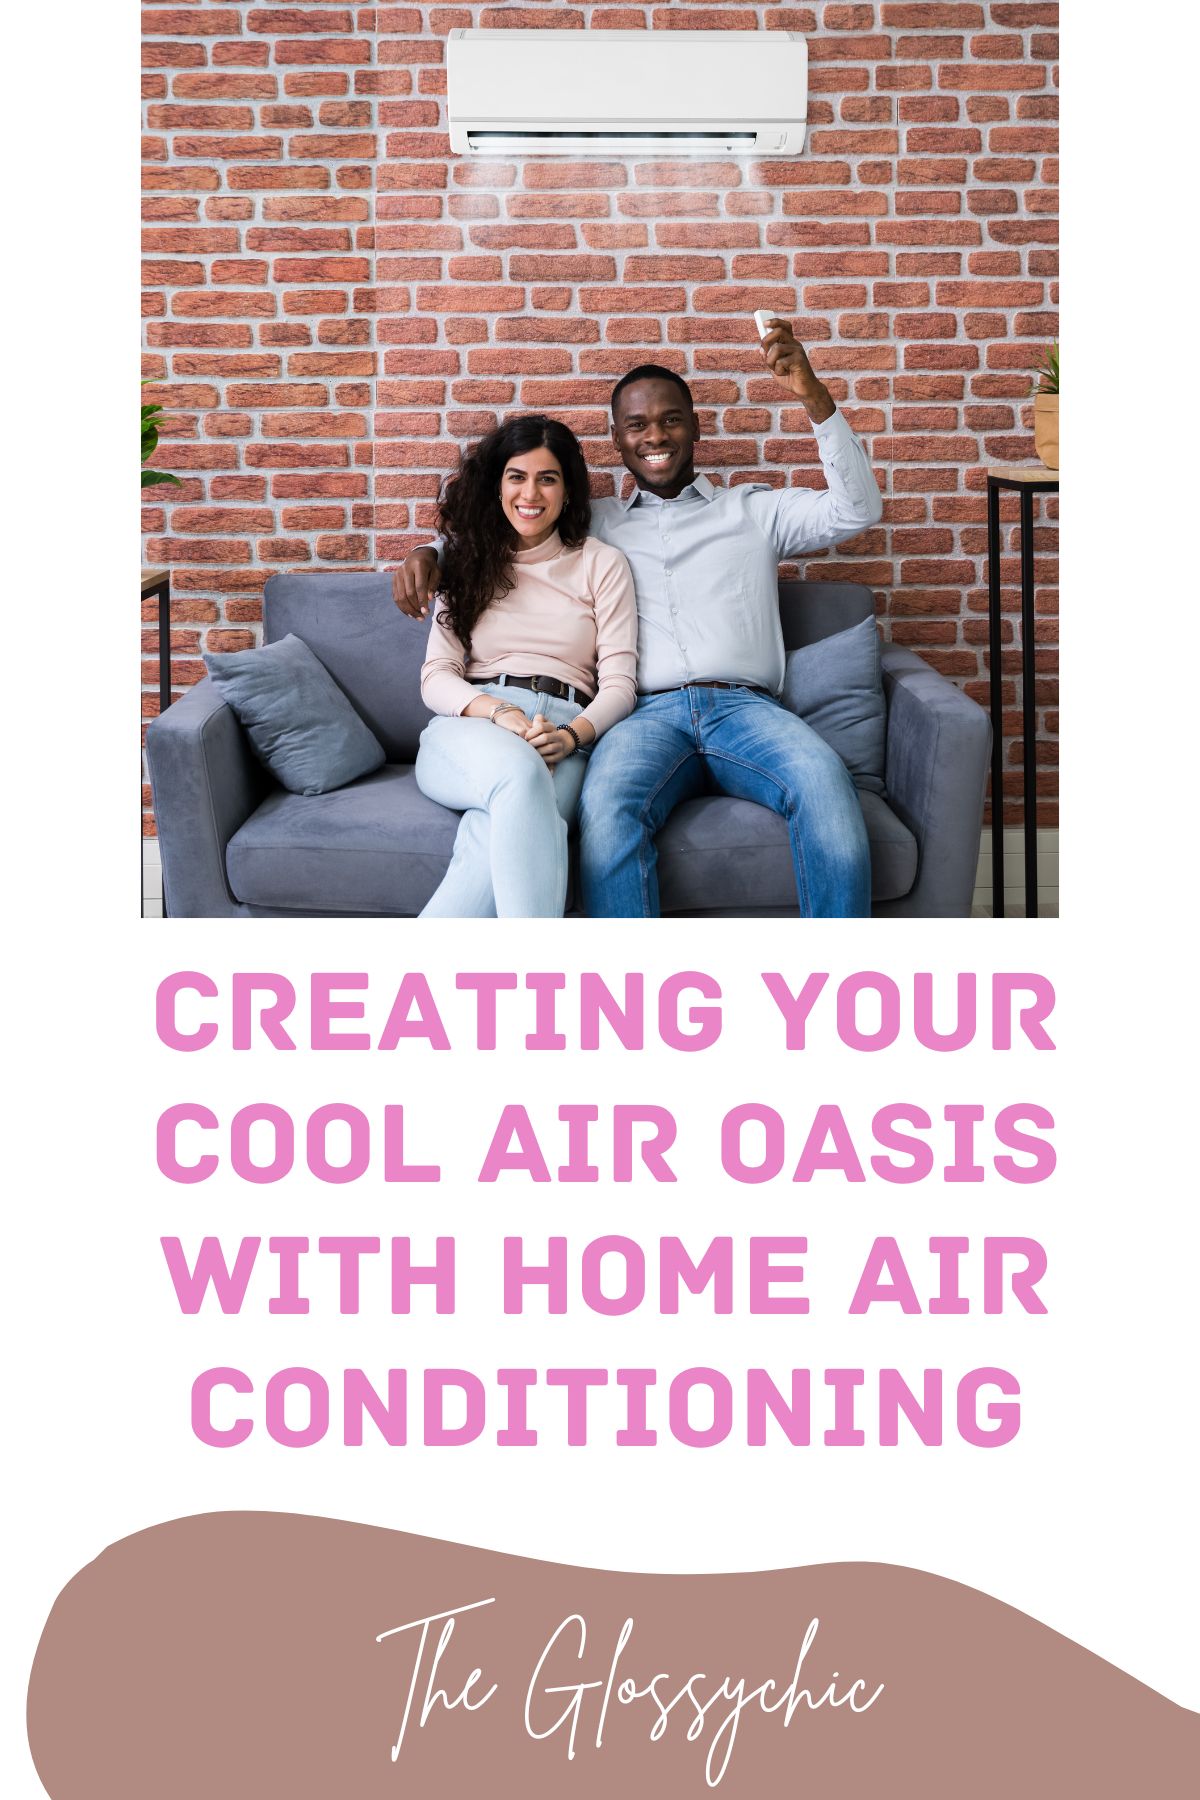 Creating Your Cool Air Oasis With Home Air Conditioning